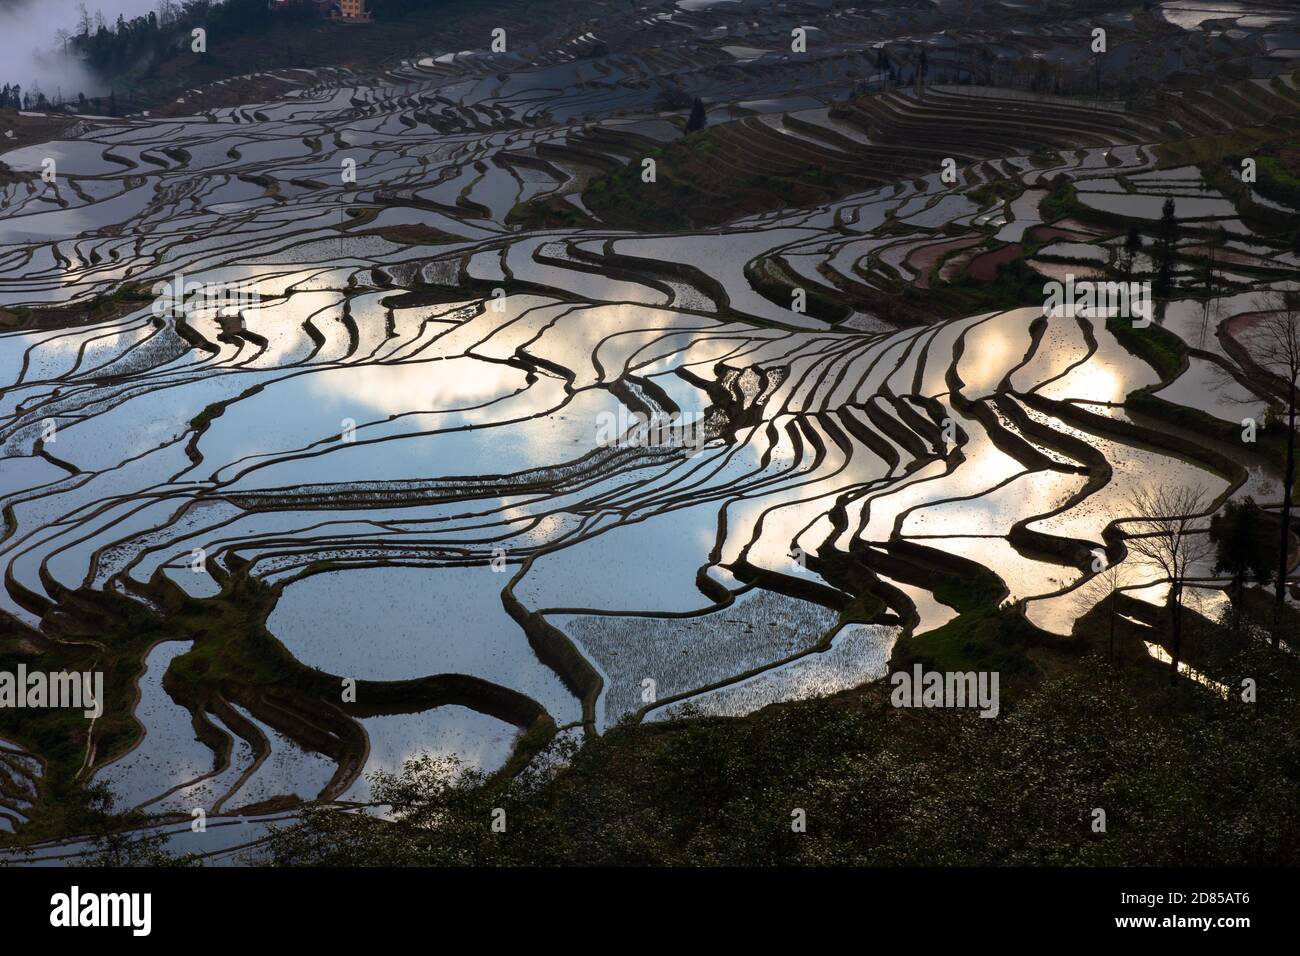 Yuan Yang Rice Terrace in China, Largest Rice Terrace in the World, World Heritage Site is in Yunnan Province Stock Photo